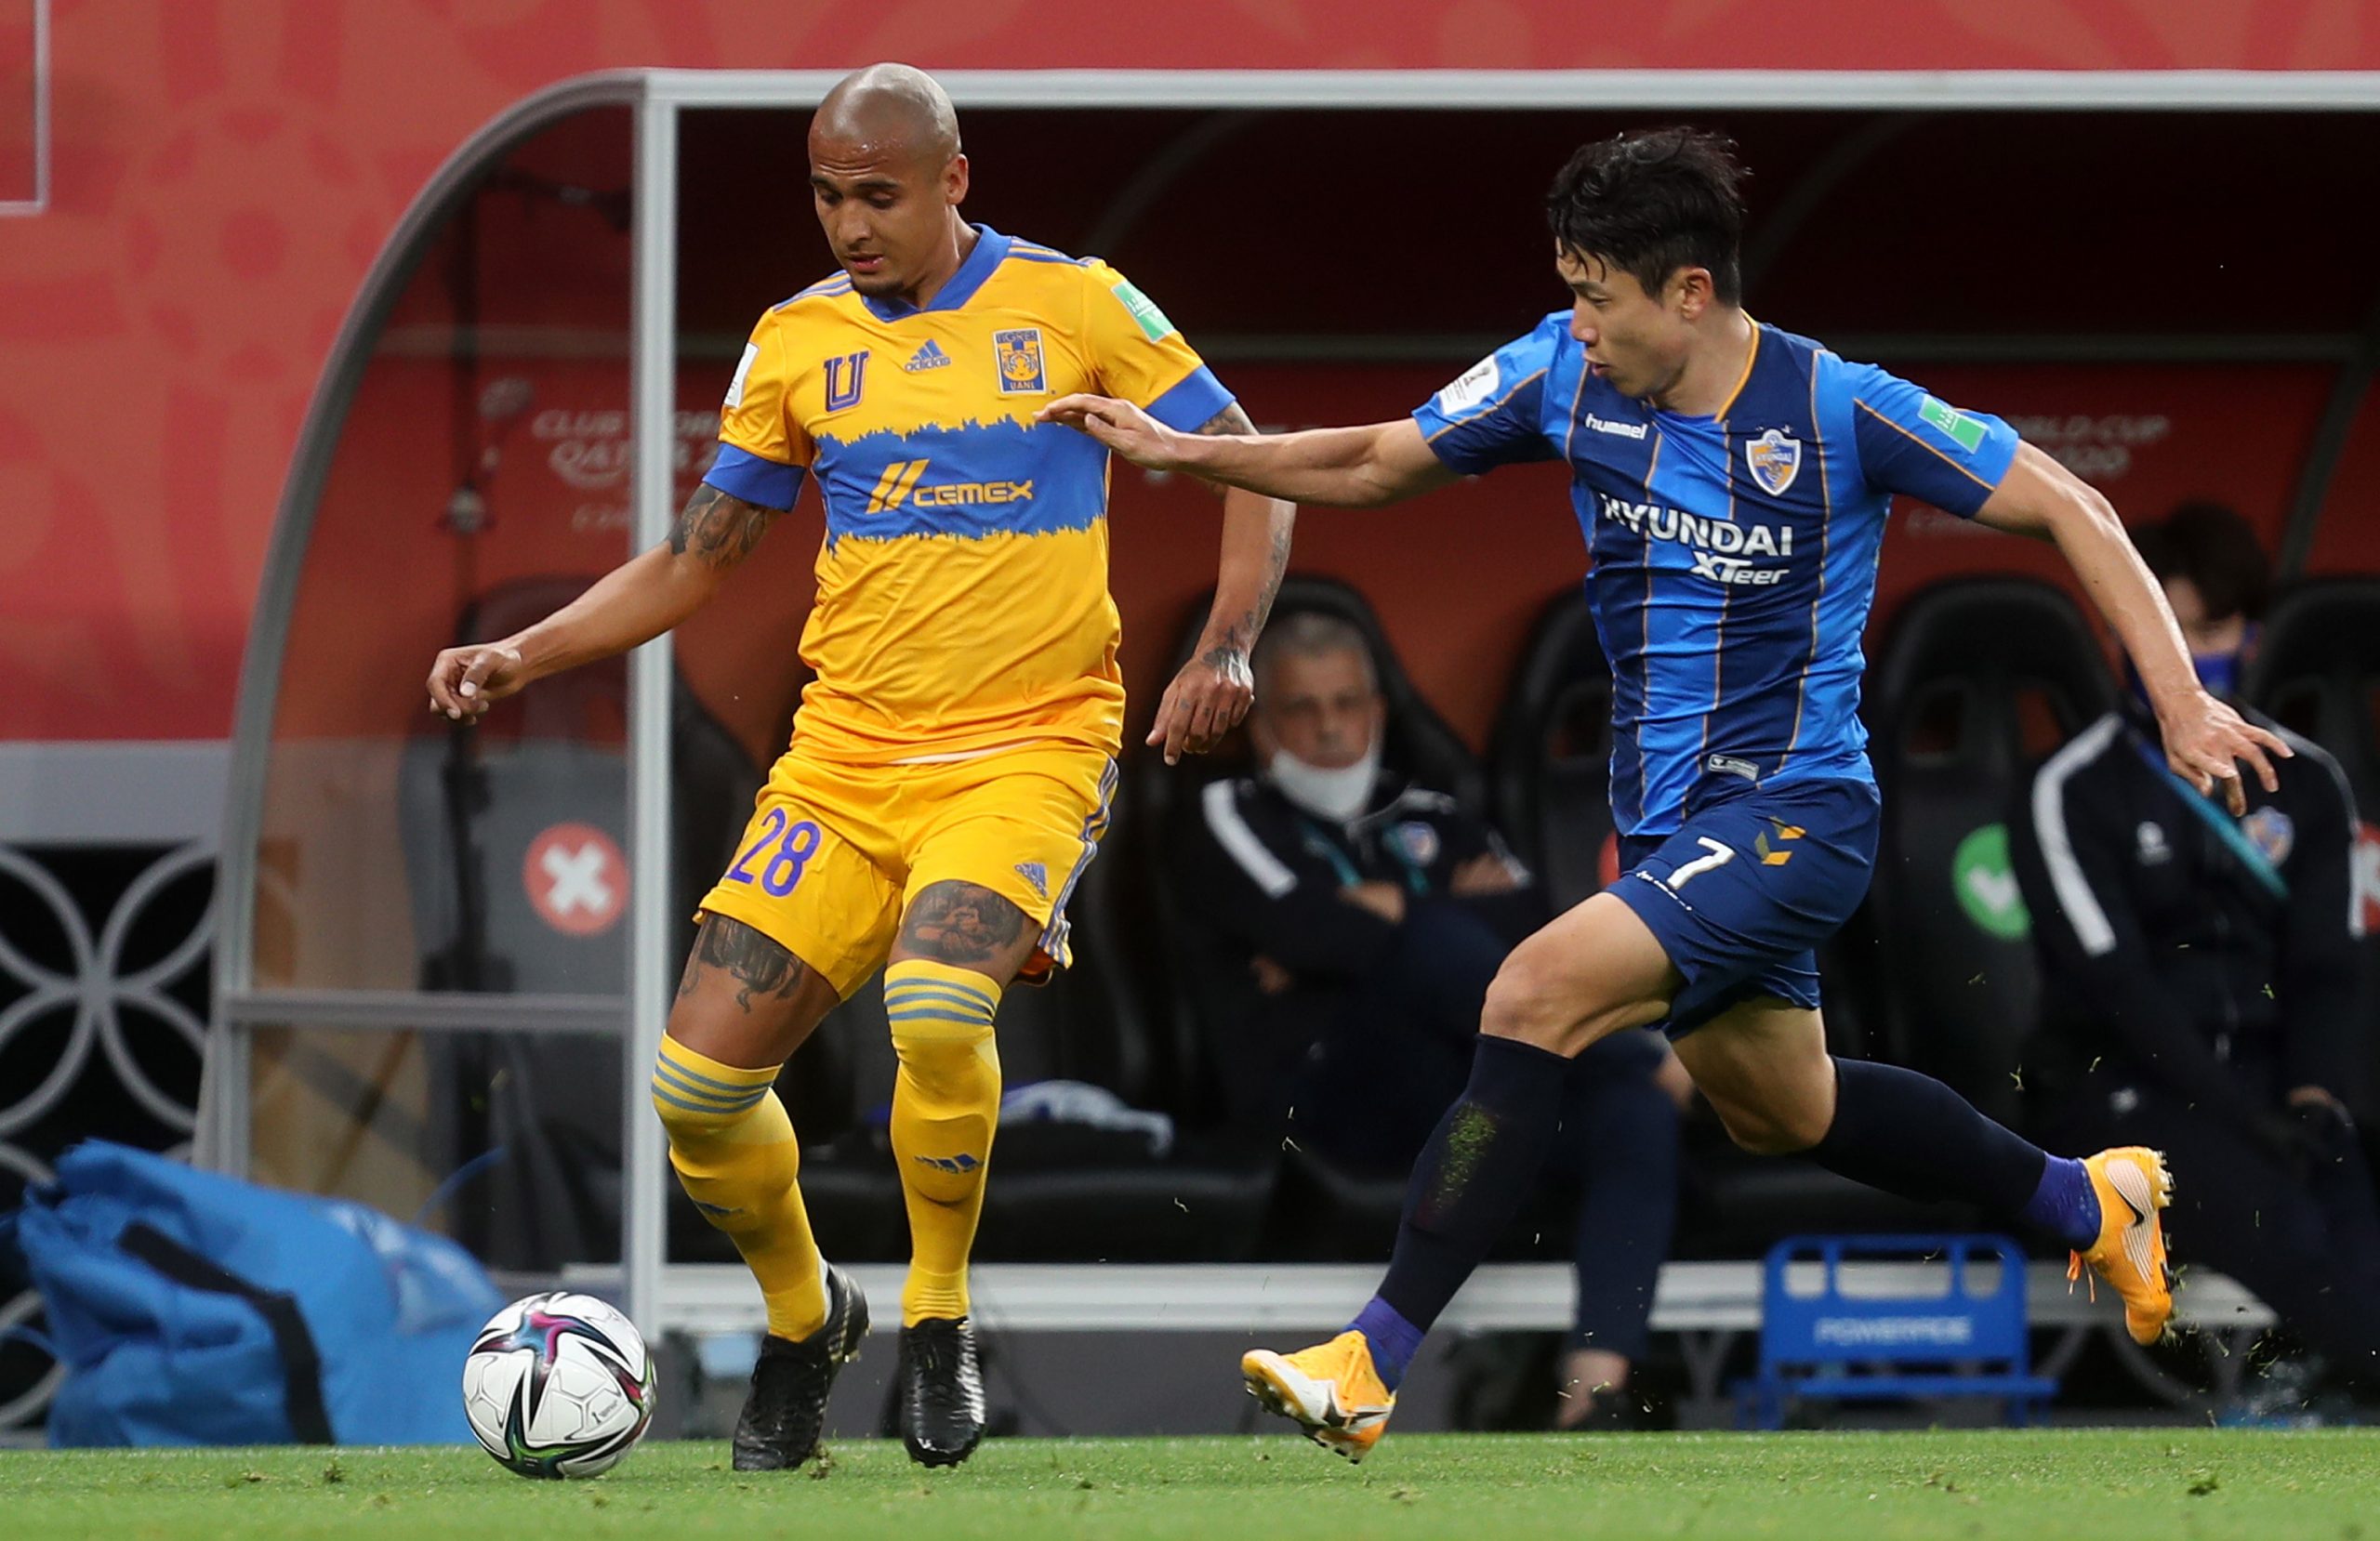 epa08986885 Luis Rodriguez (L) of Tigres in action against Kim Insung of Ulsan during the 2nd round match between Tigres UANL and Ulsan Hyundai FC at the FIFA Club World Cup in Al Rayyan, Qatar, 04 February 2021.  EPA/ABBAS ALI